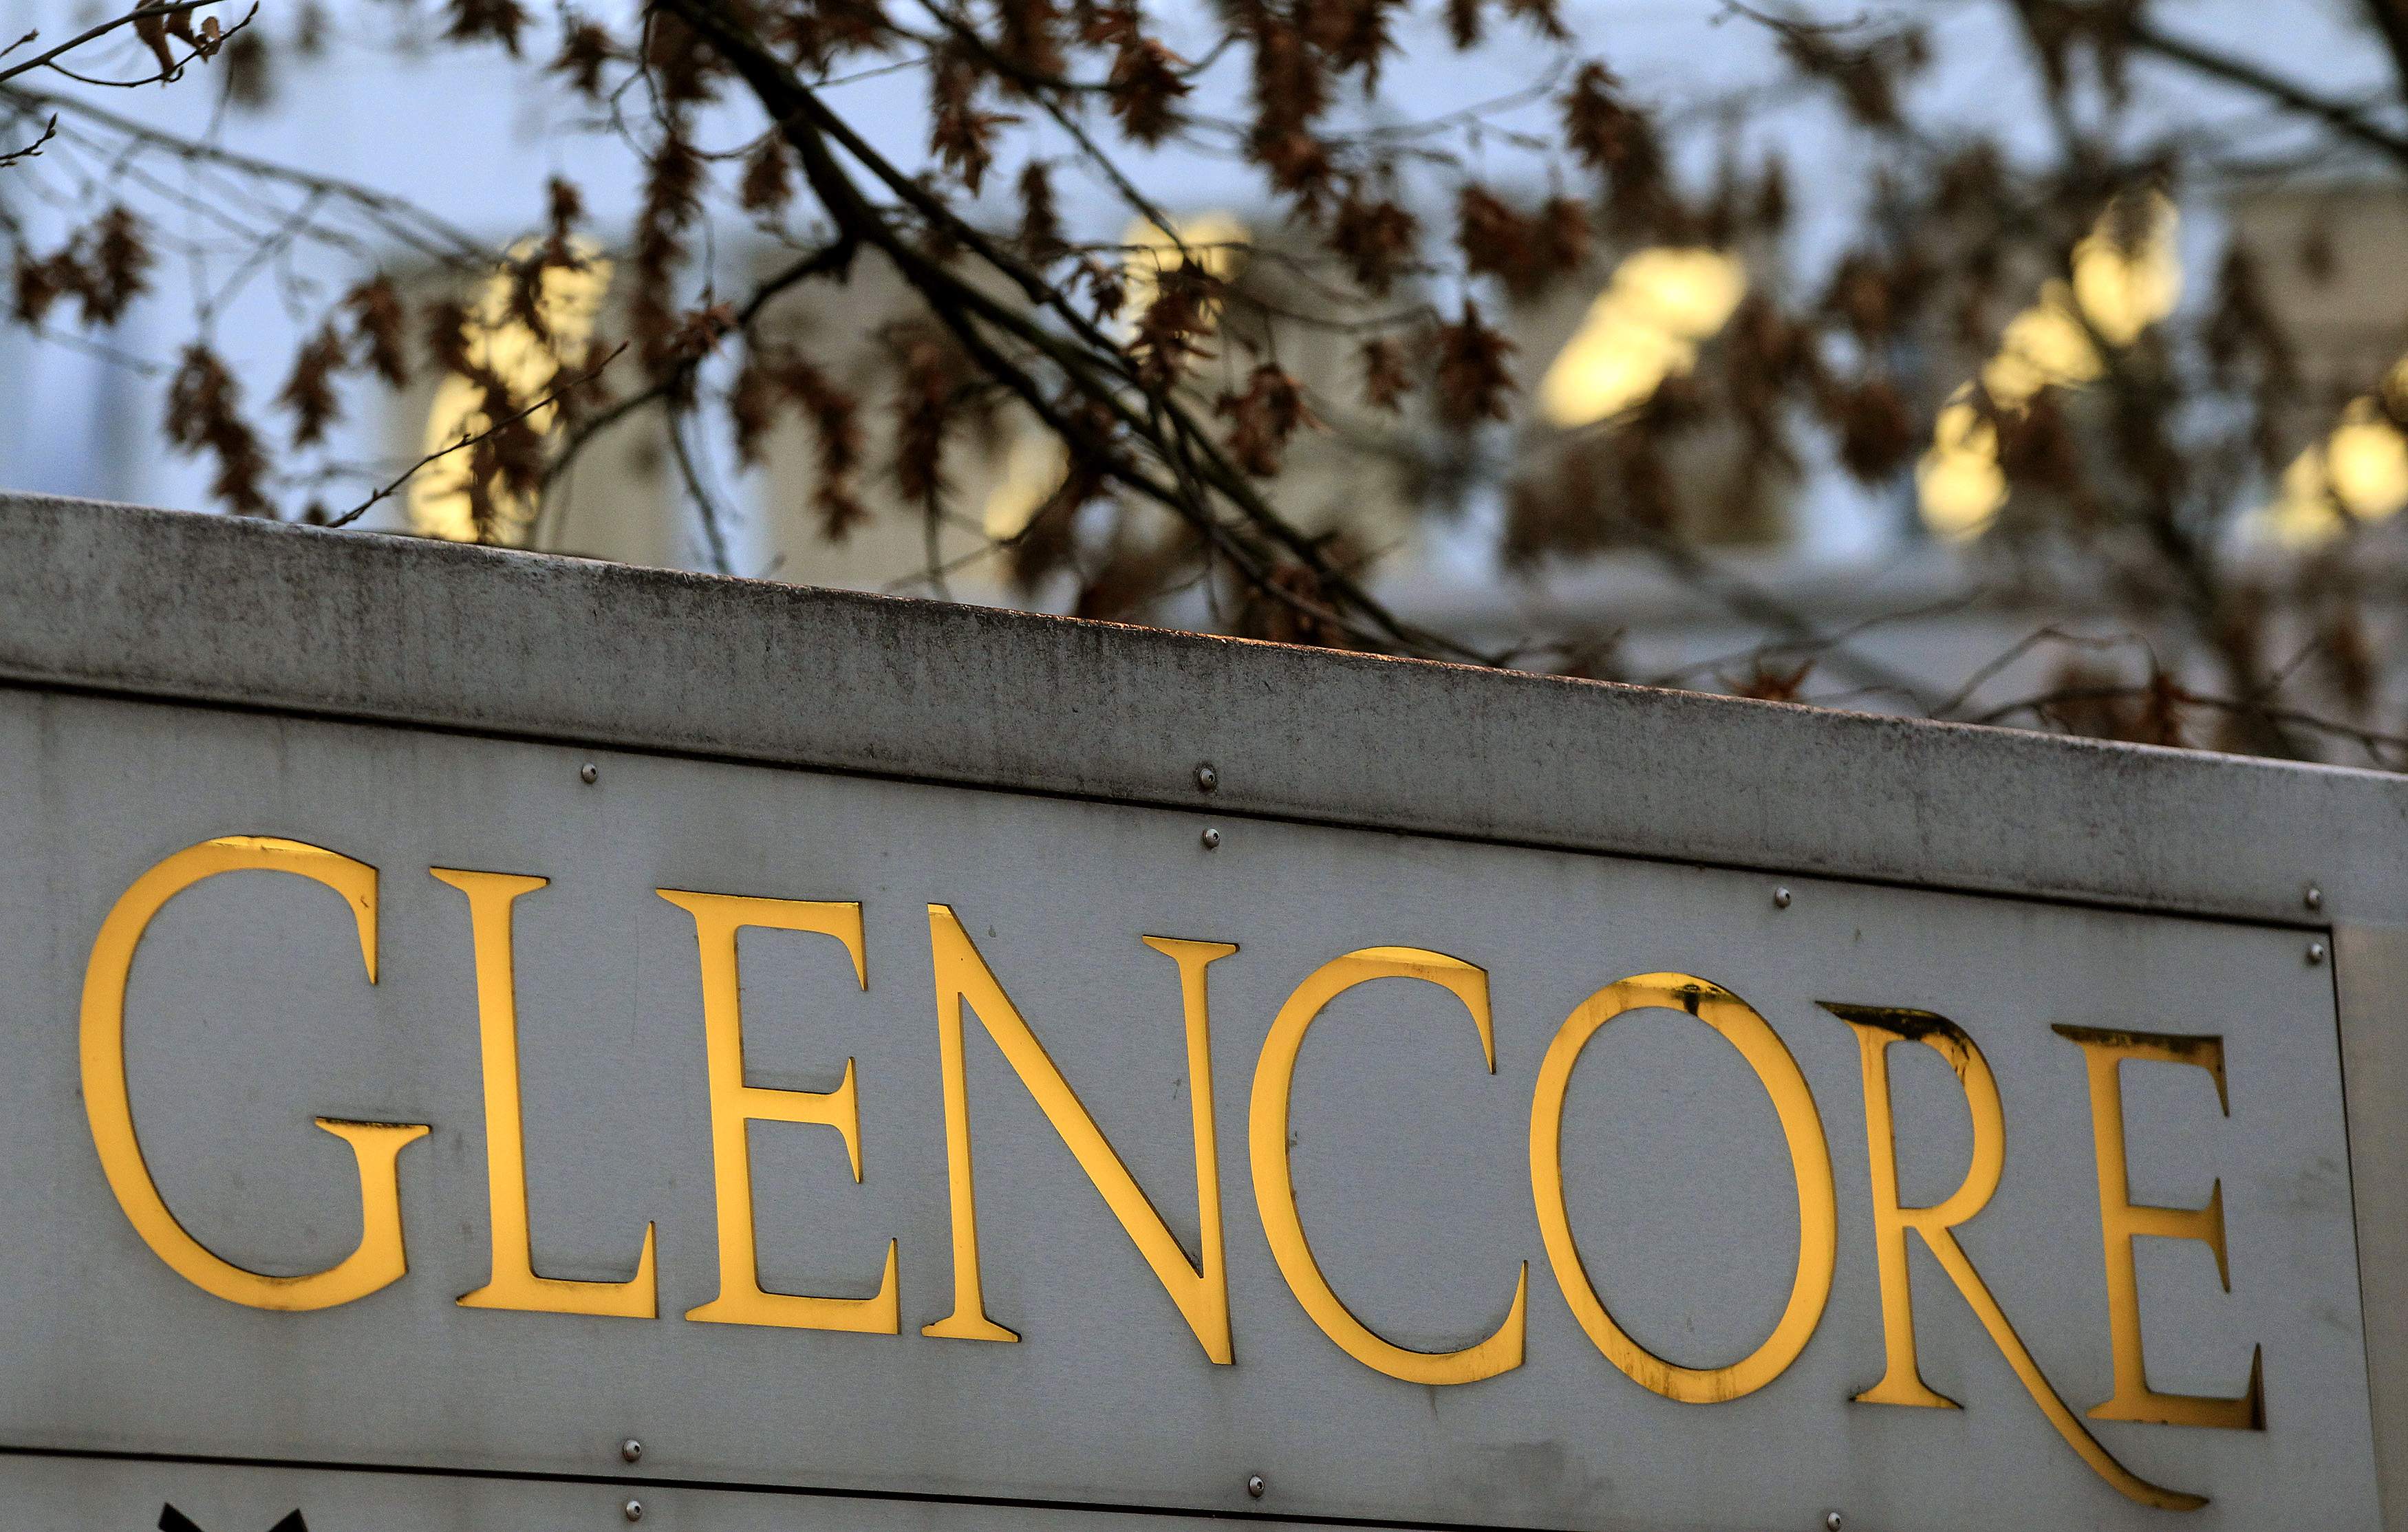 Glencore's net debt amounted to US$29.6 billion as of the end of June. Photo: Reuters